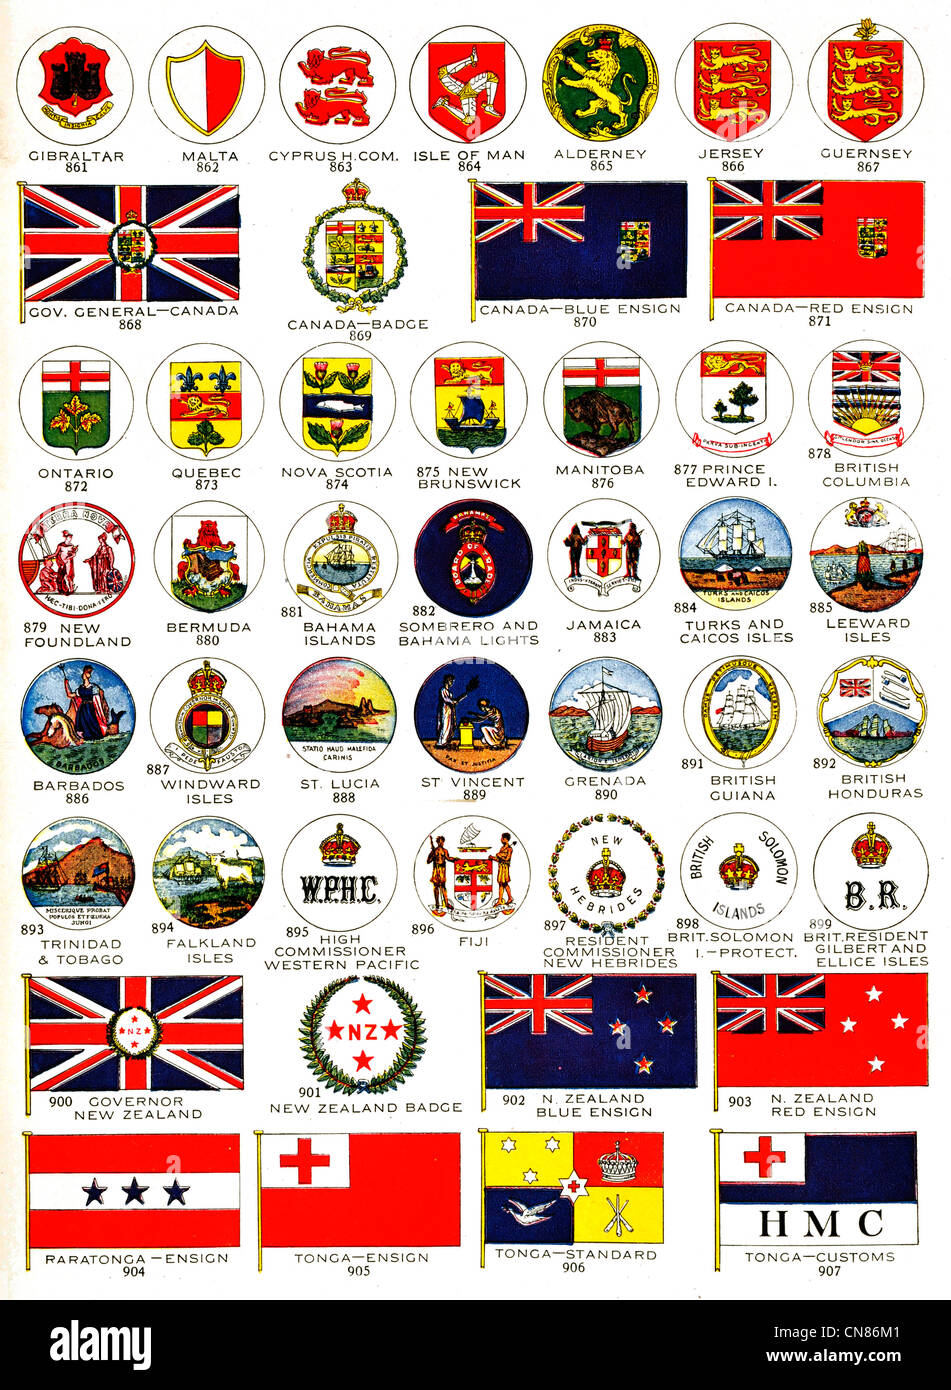 First published 1917 Flag Flags Standard Gibraltar Malta Cyprus isle of Man  Alderney Jersey Guernsey General Canada Badge Stock Photo - Alamy